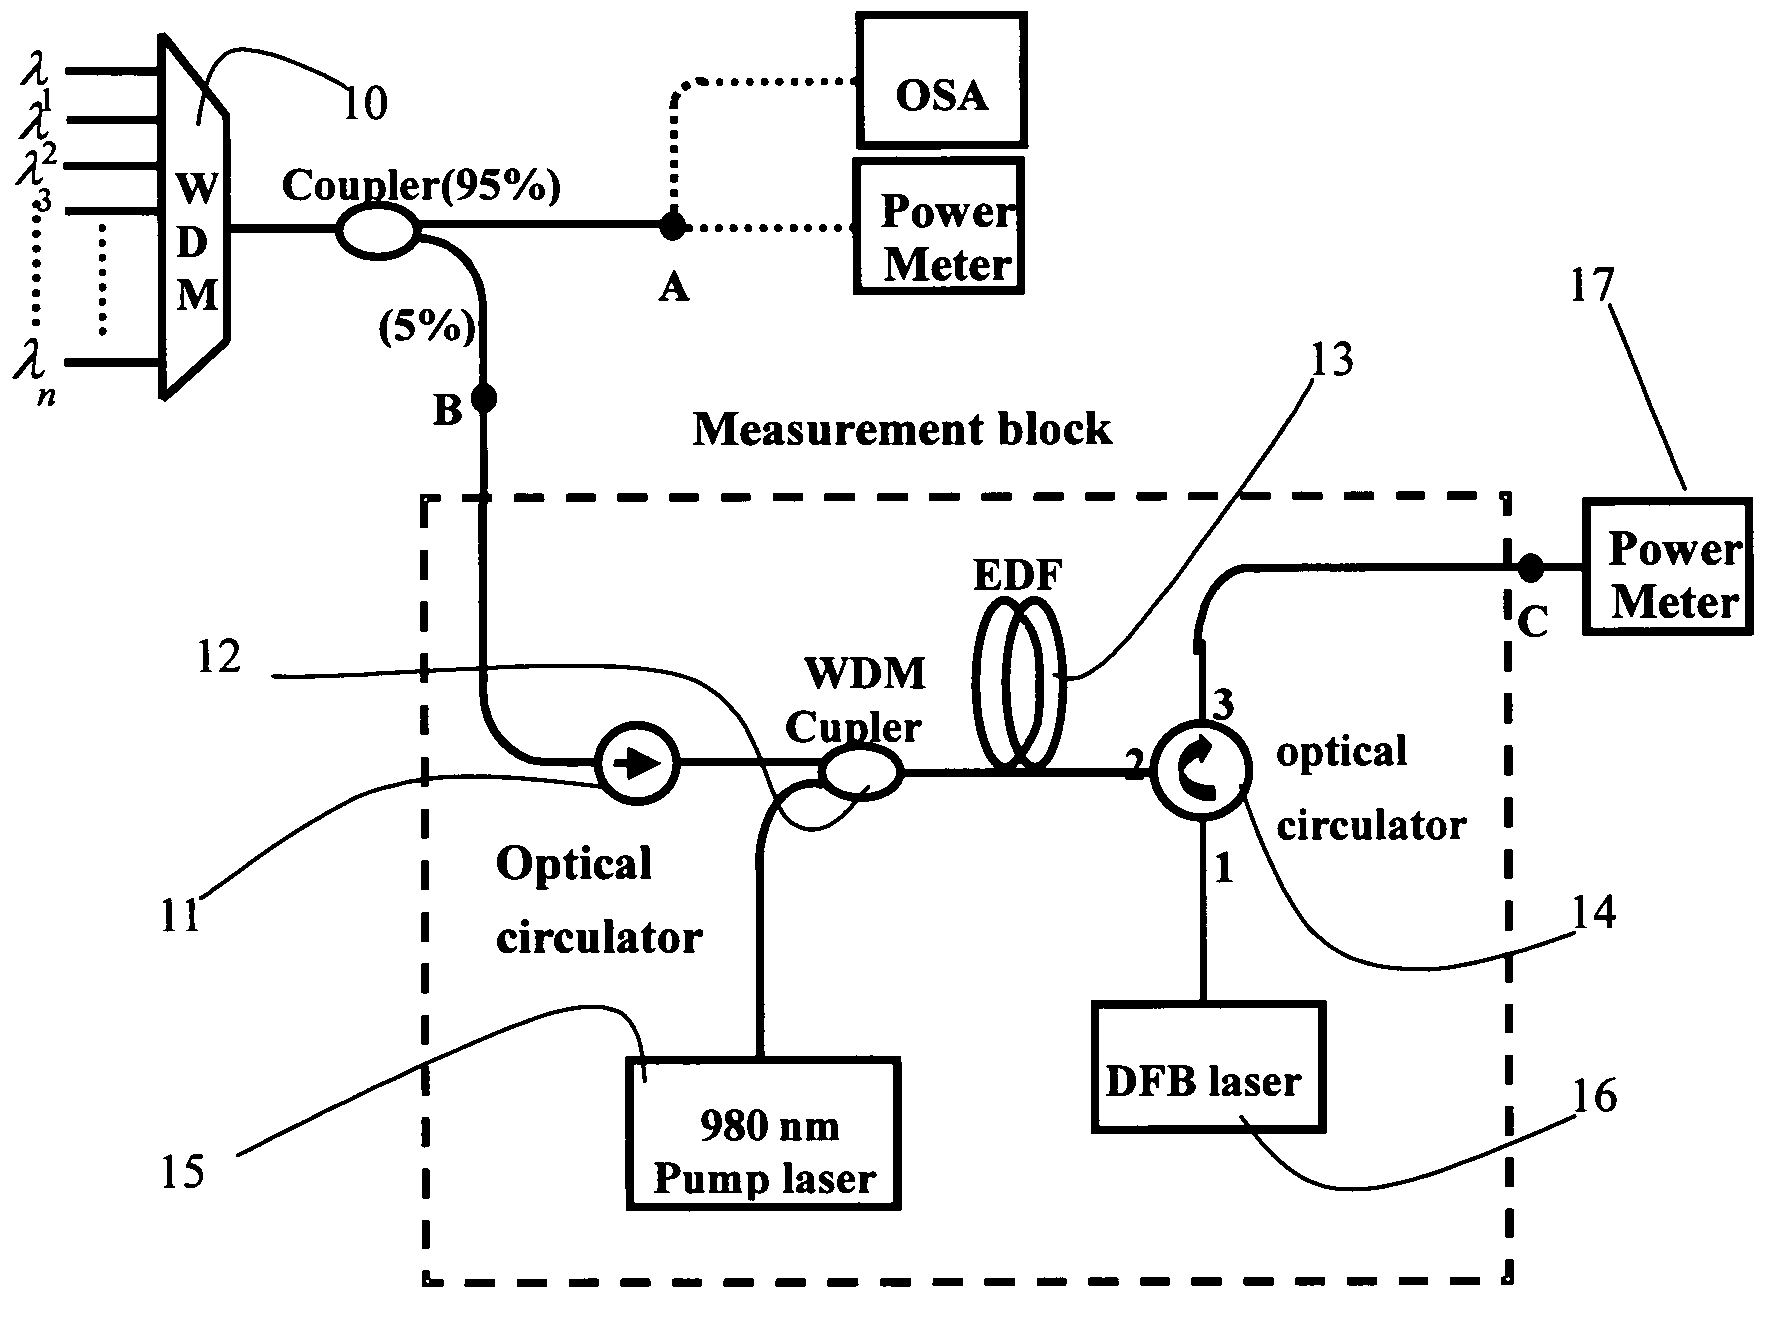 Optical monitoring apparatus for use in wavelength division multiplexing network